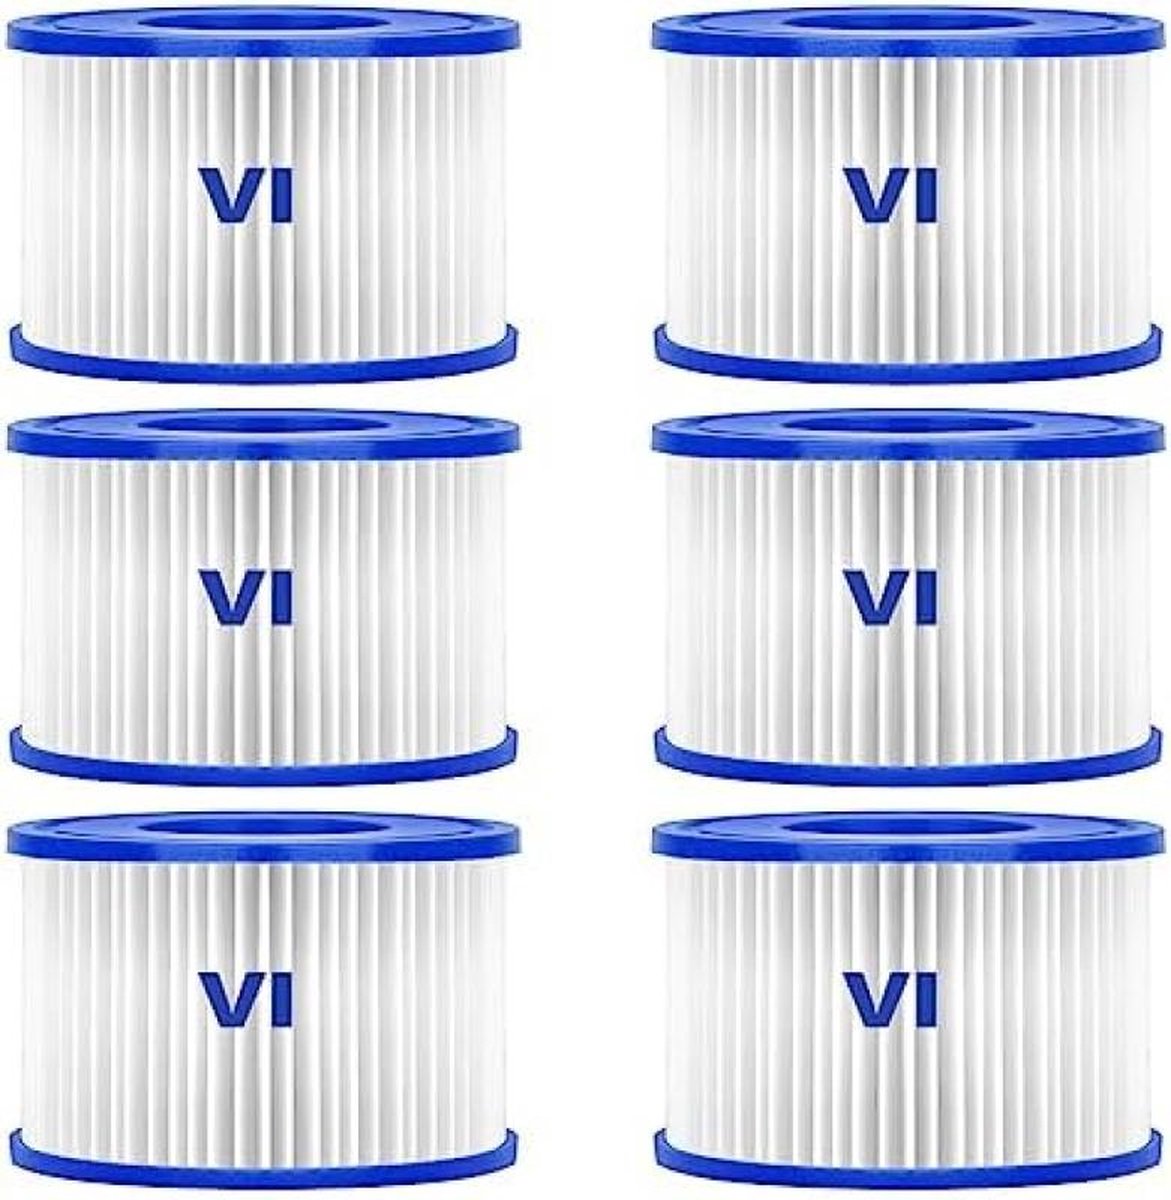 Pool Filter Cartridges VI Compatible with Bestway Miami, Monaco Lay-Z-Spa, Vegas, Palm Springs, Flowclear Pool Filter - Pack of 6